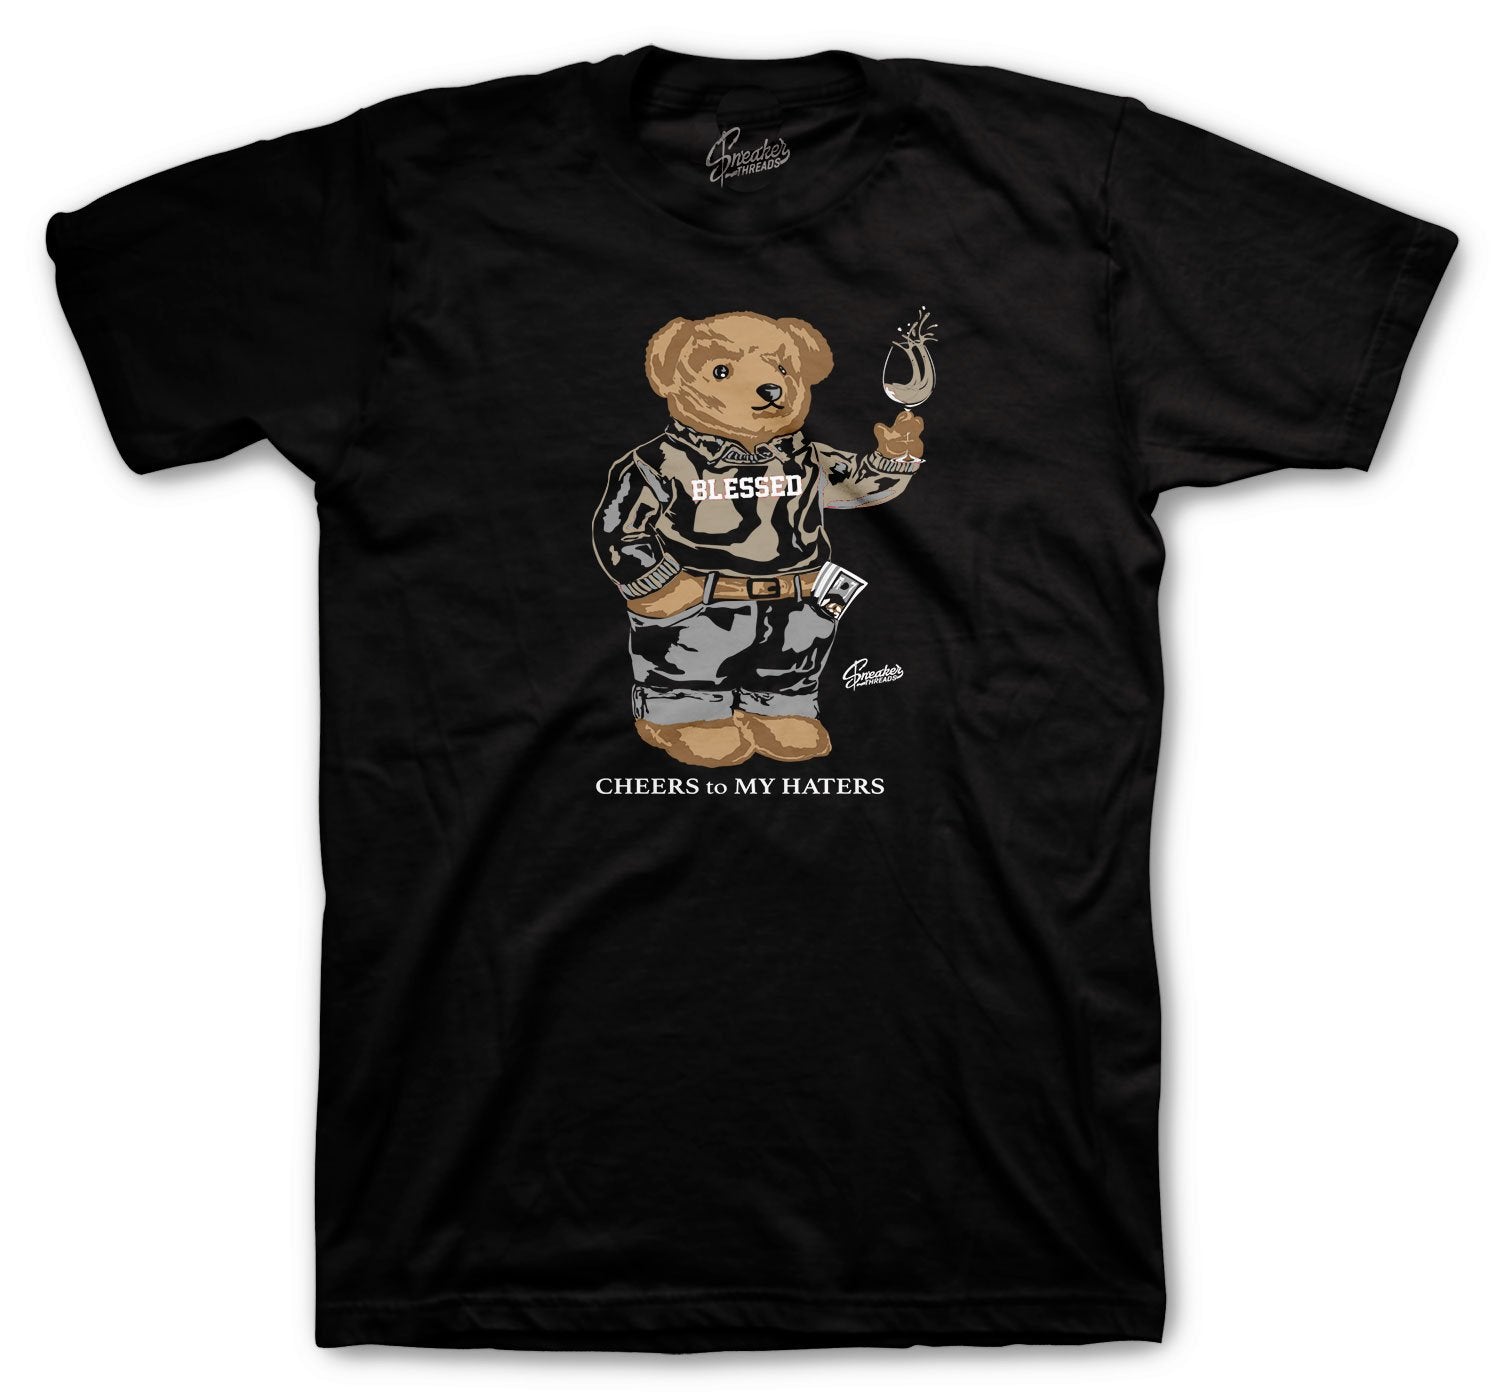 Yeezy Stone 500 Cheers Bear shirt to match sneakers